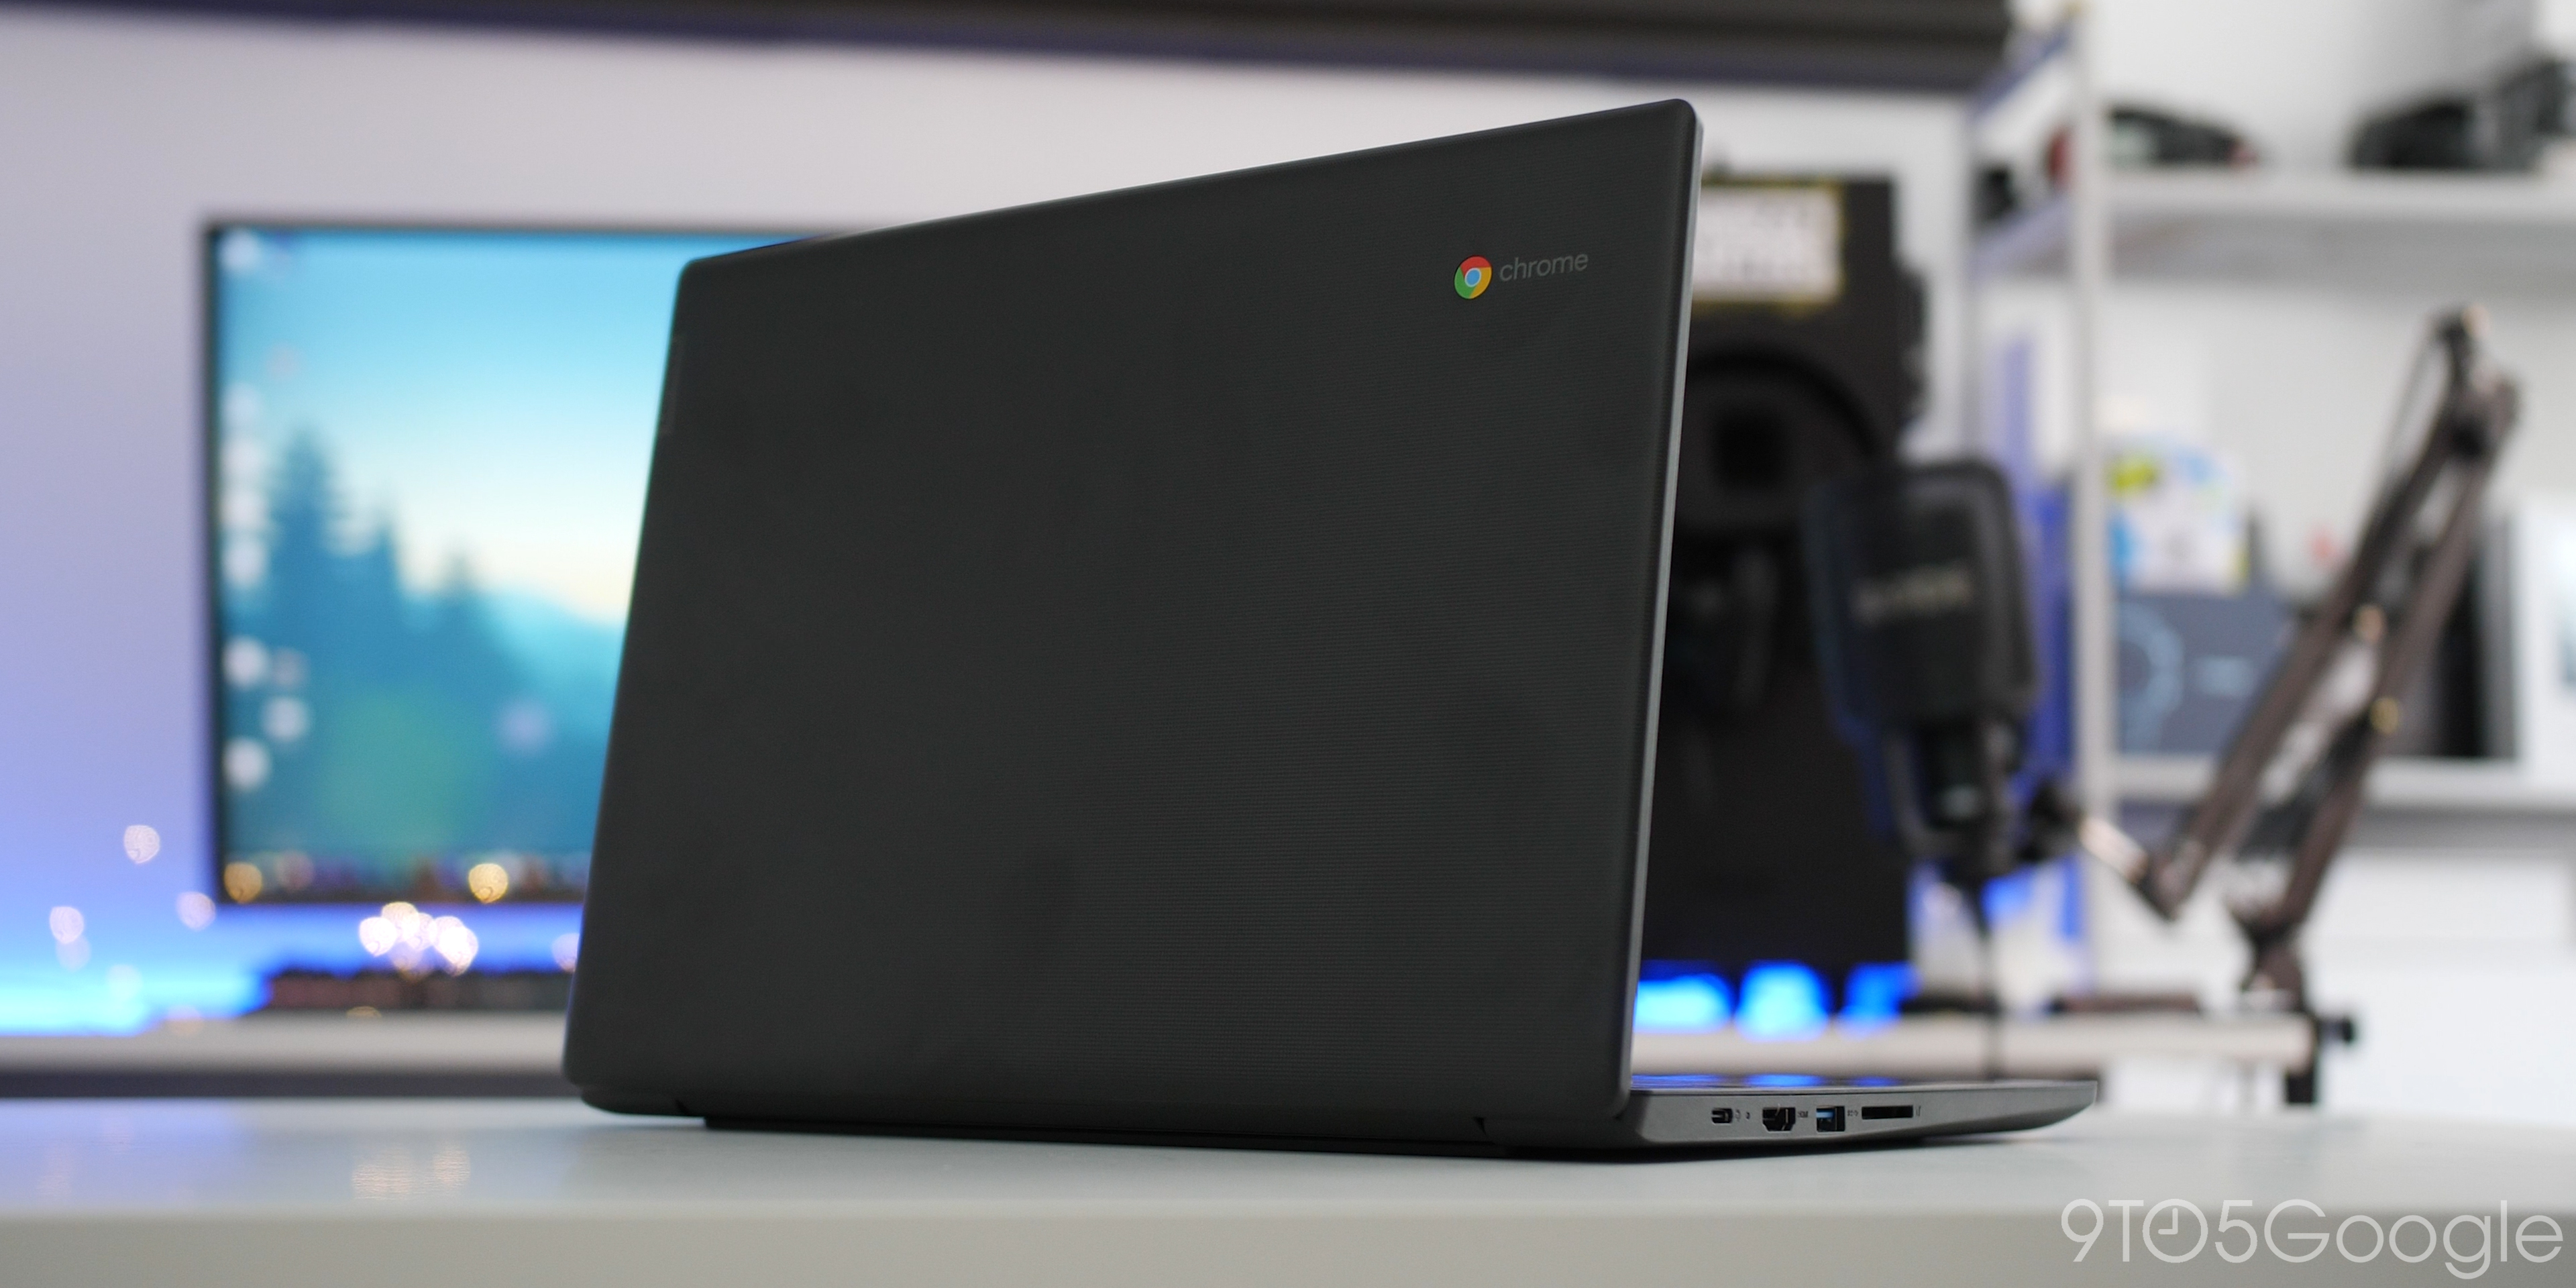 Lenovo S330 Chromebook review: A great value ultra-basic laptop 